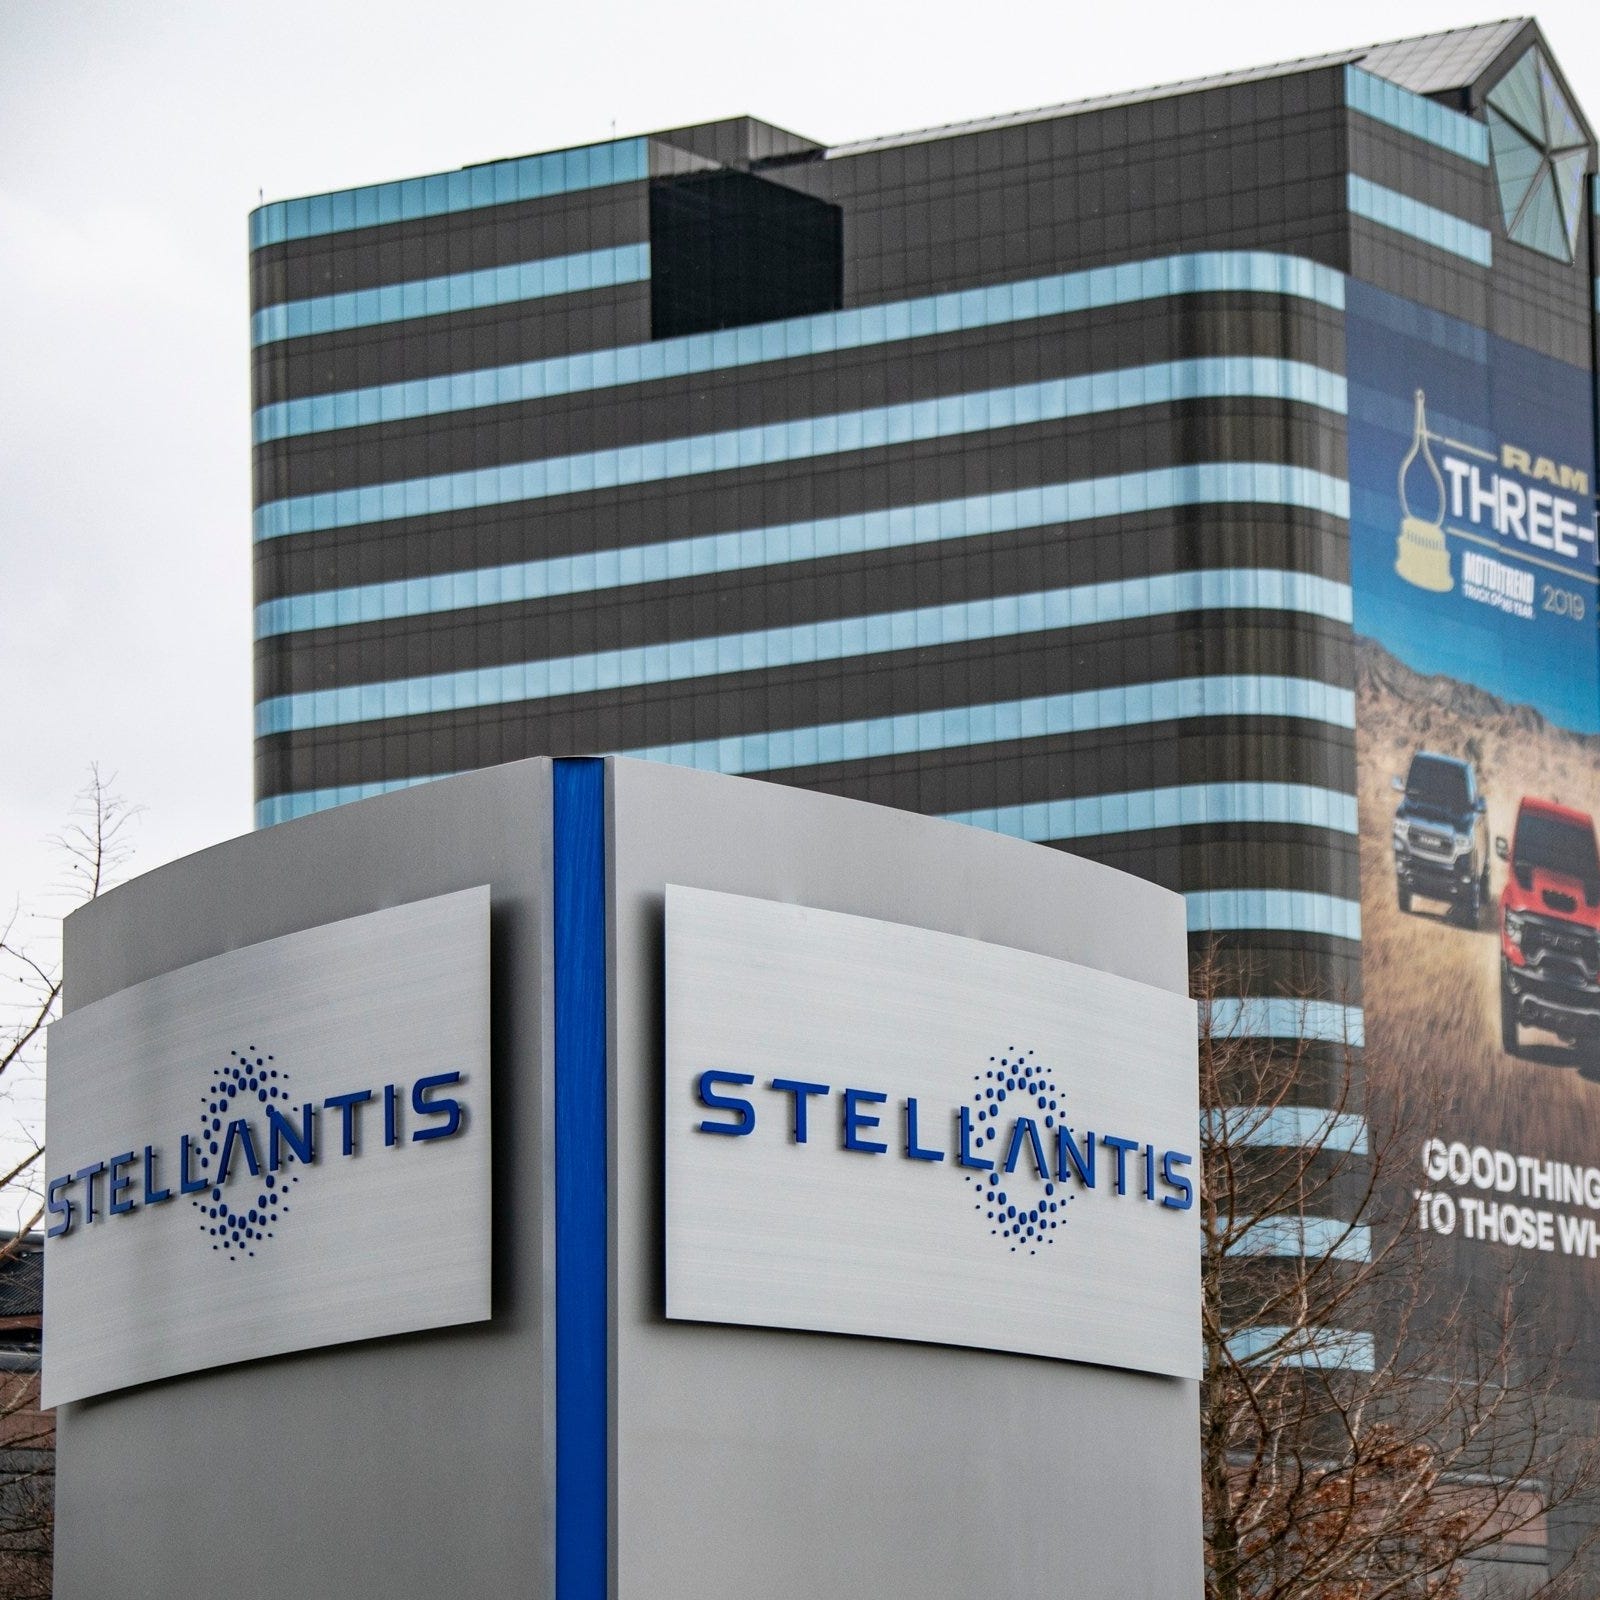 Stellantis announced its 2022 earnings and profit-sharing checks for 2023 on Wednesday.